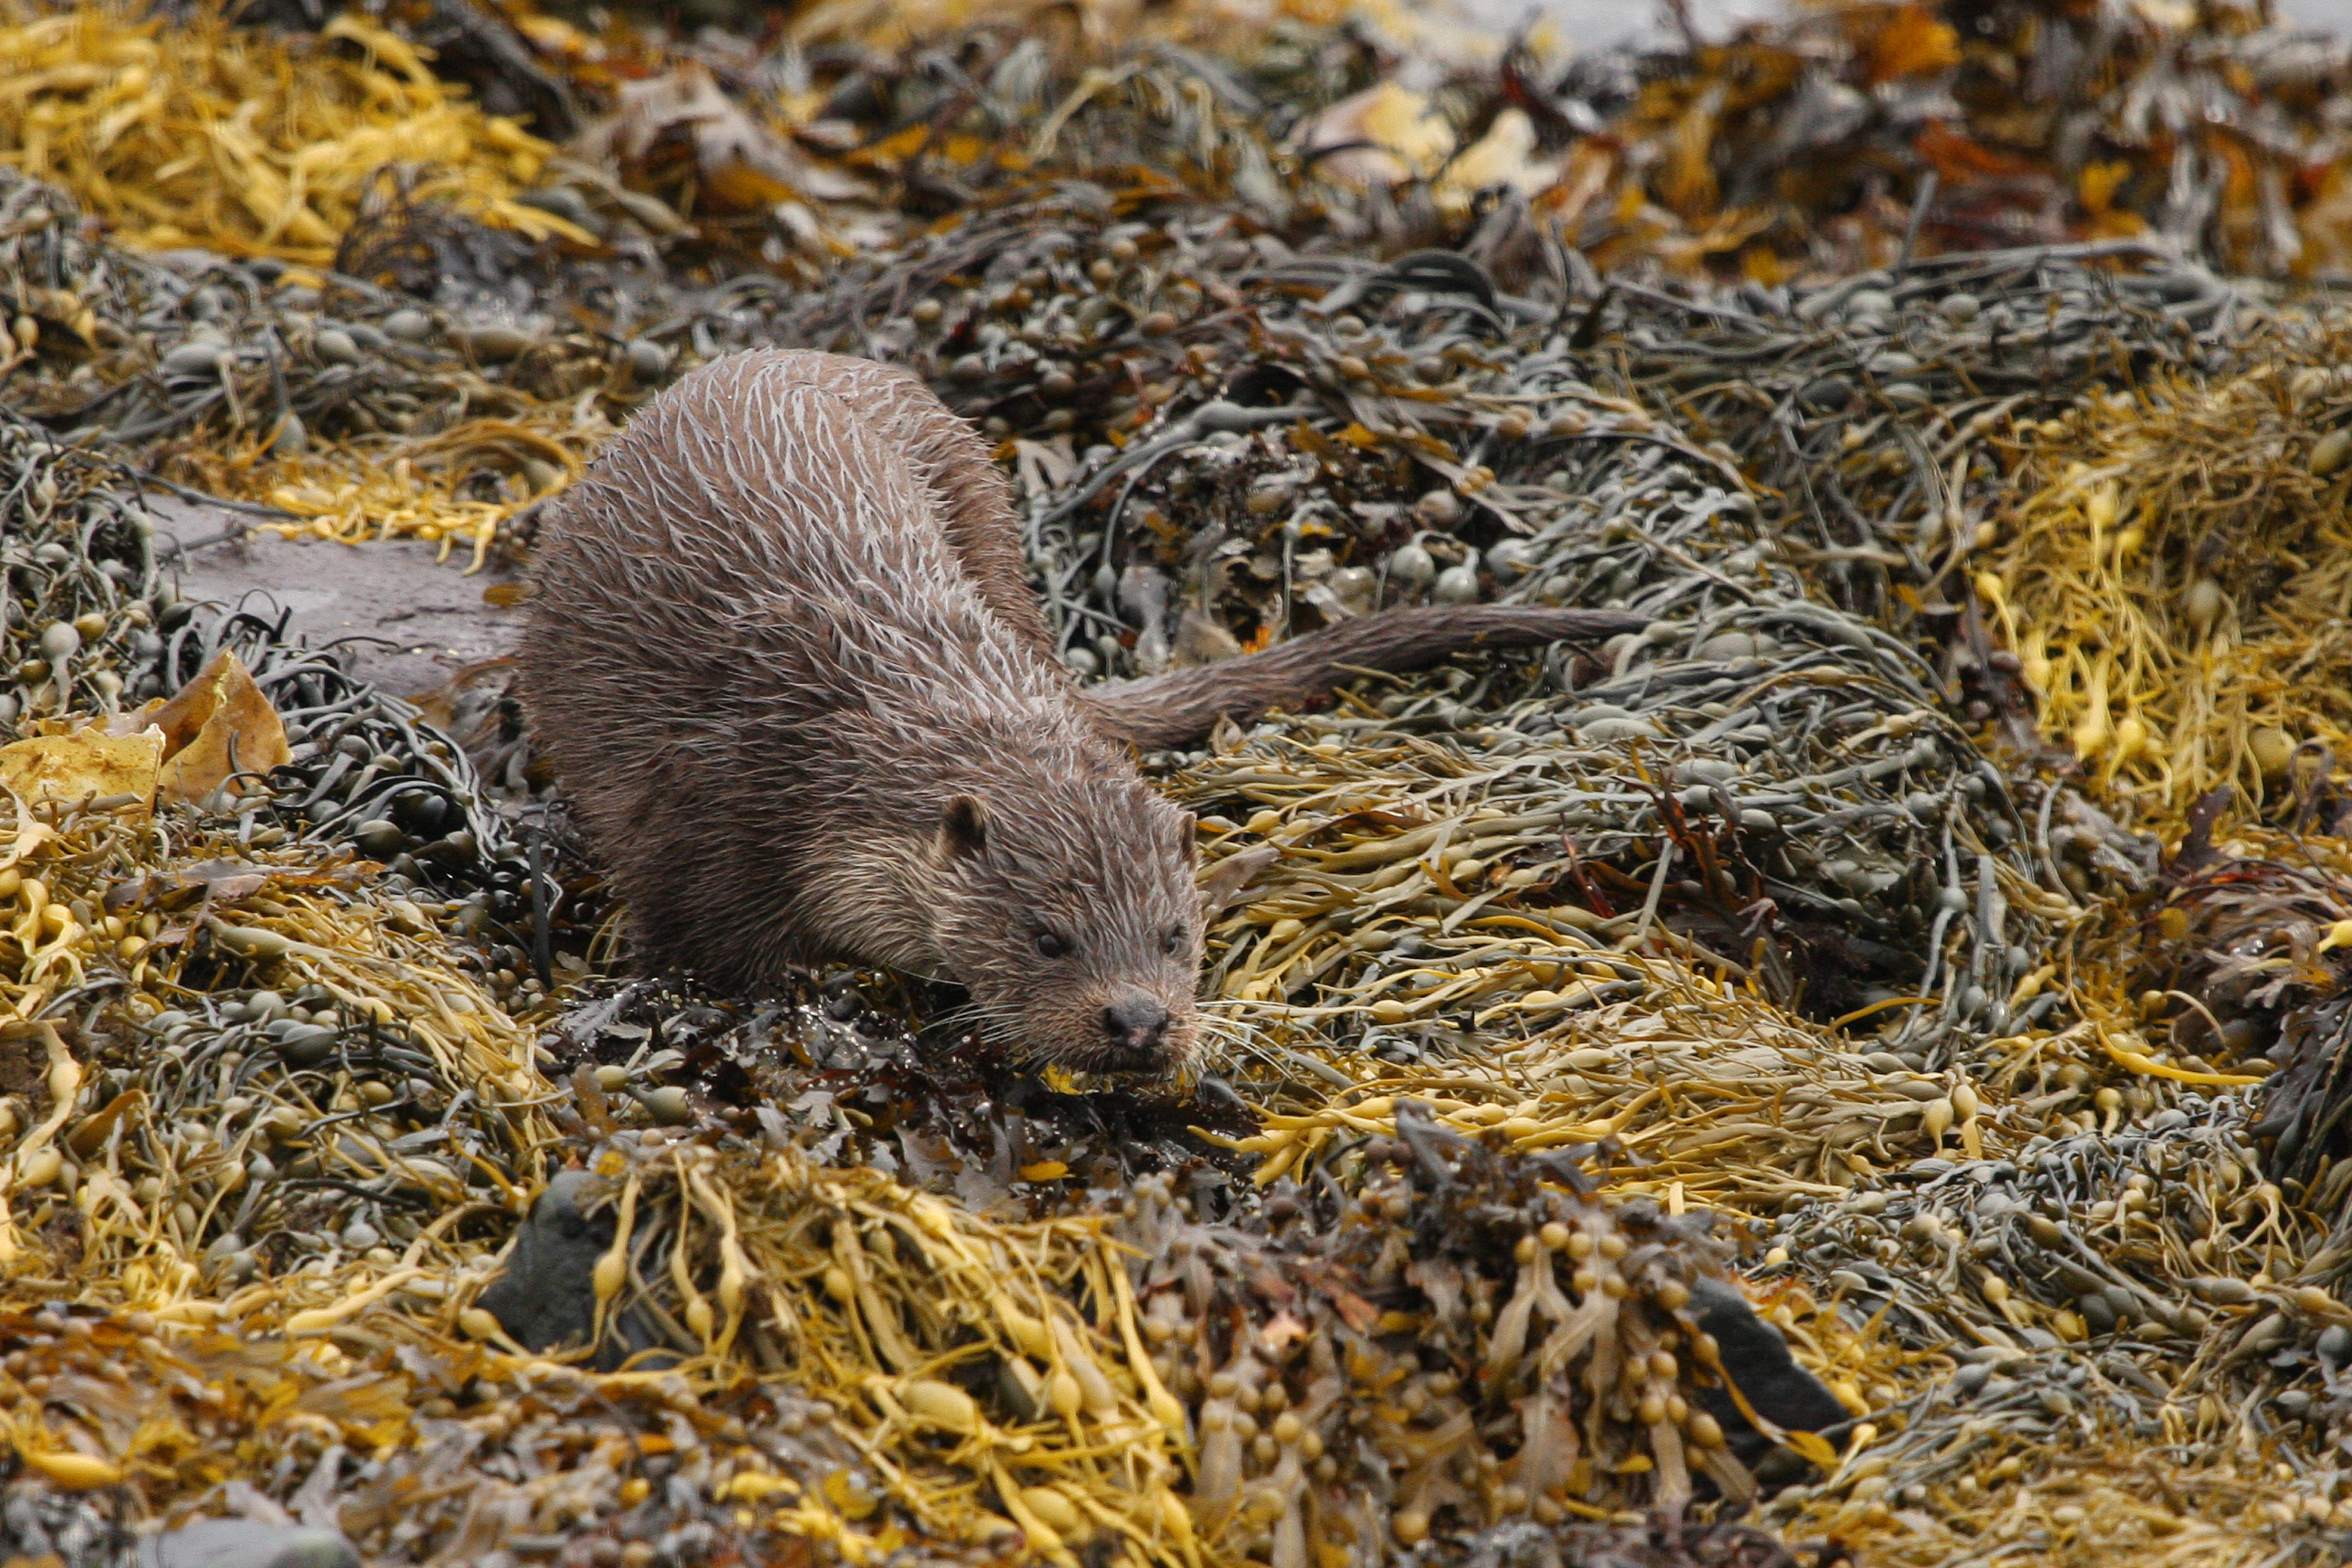 Young otter creeping through seaweed